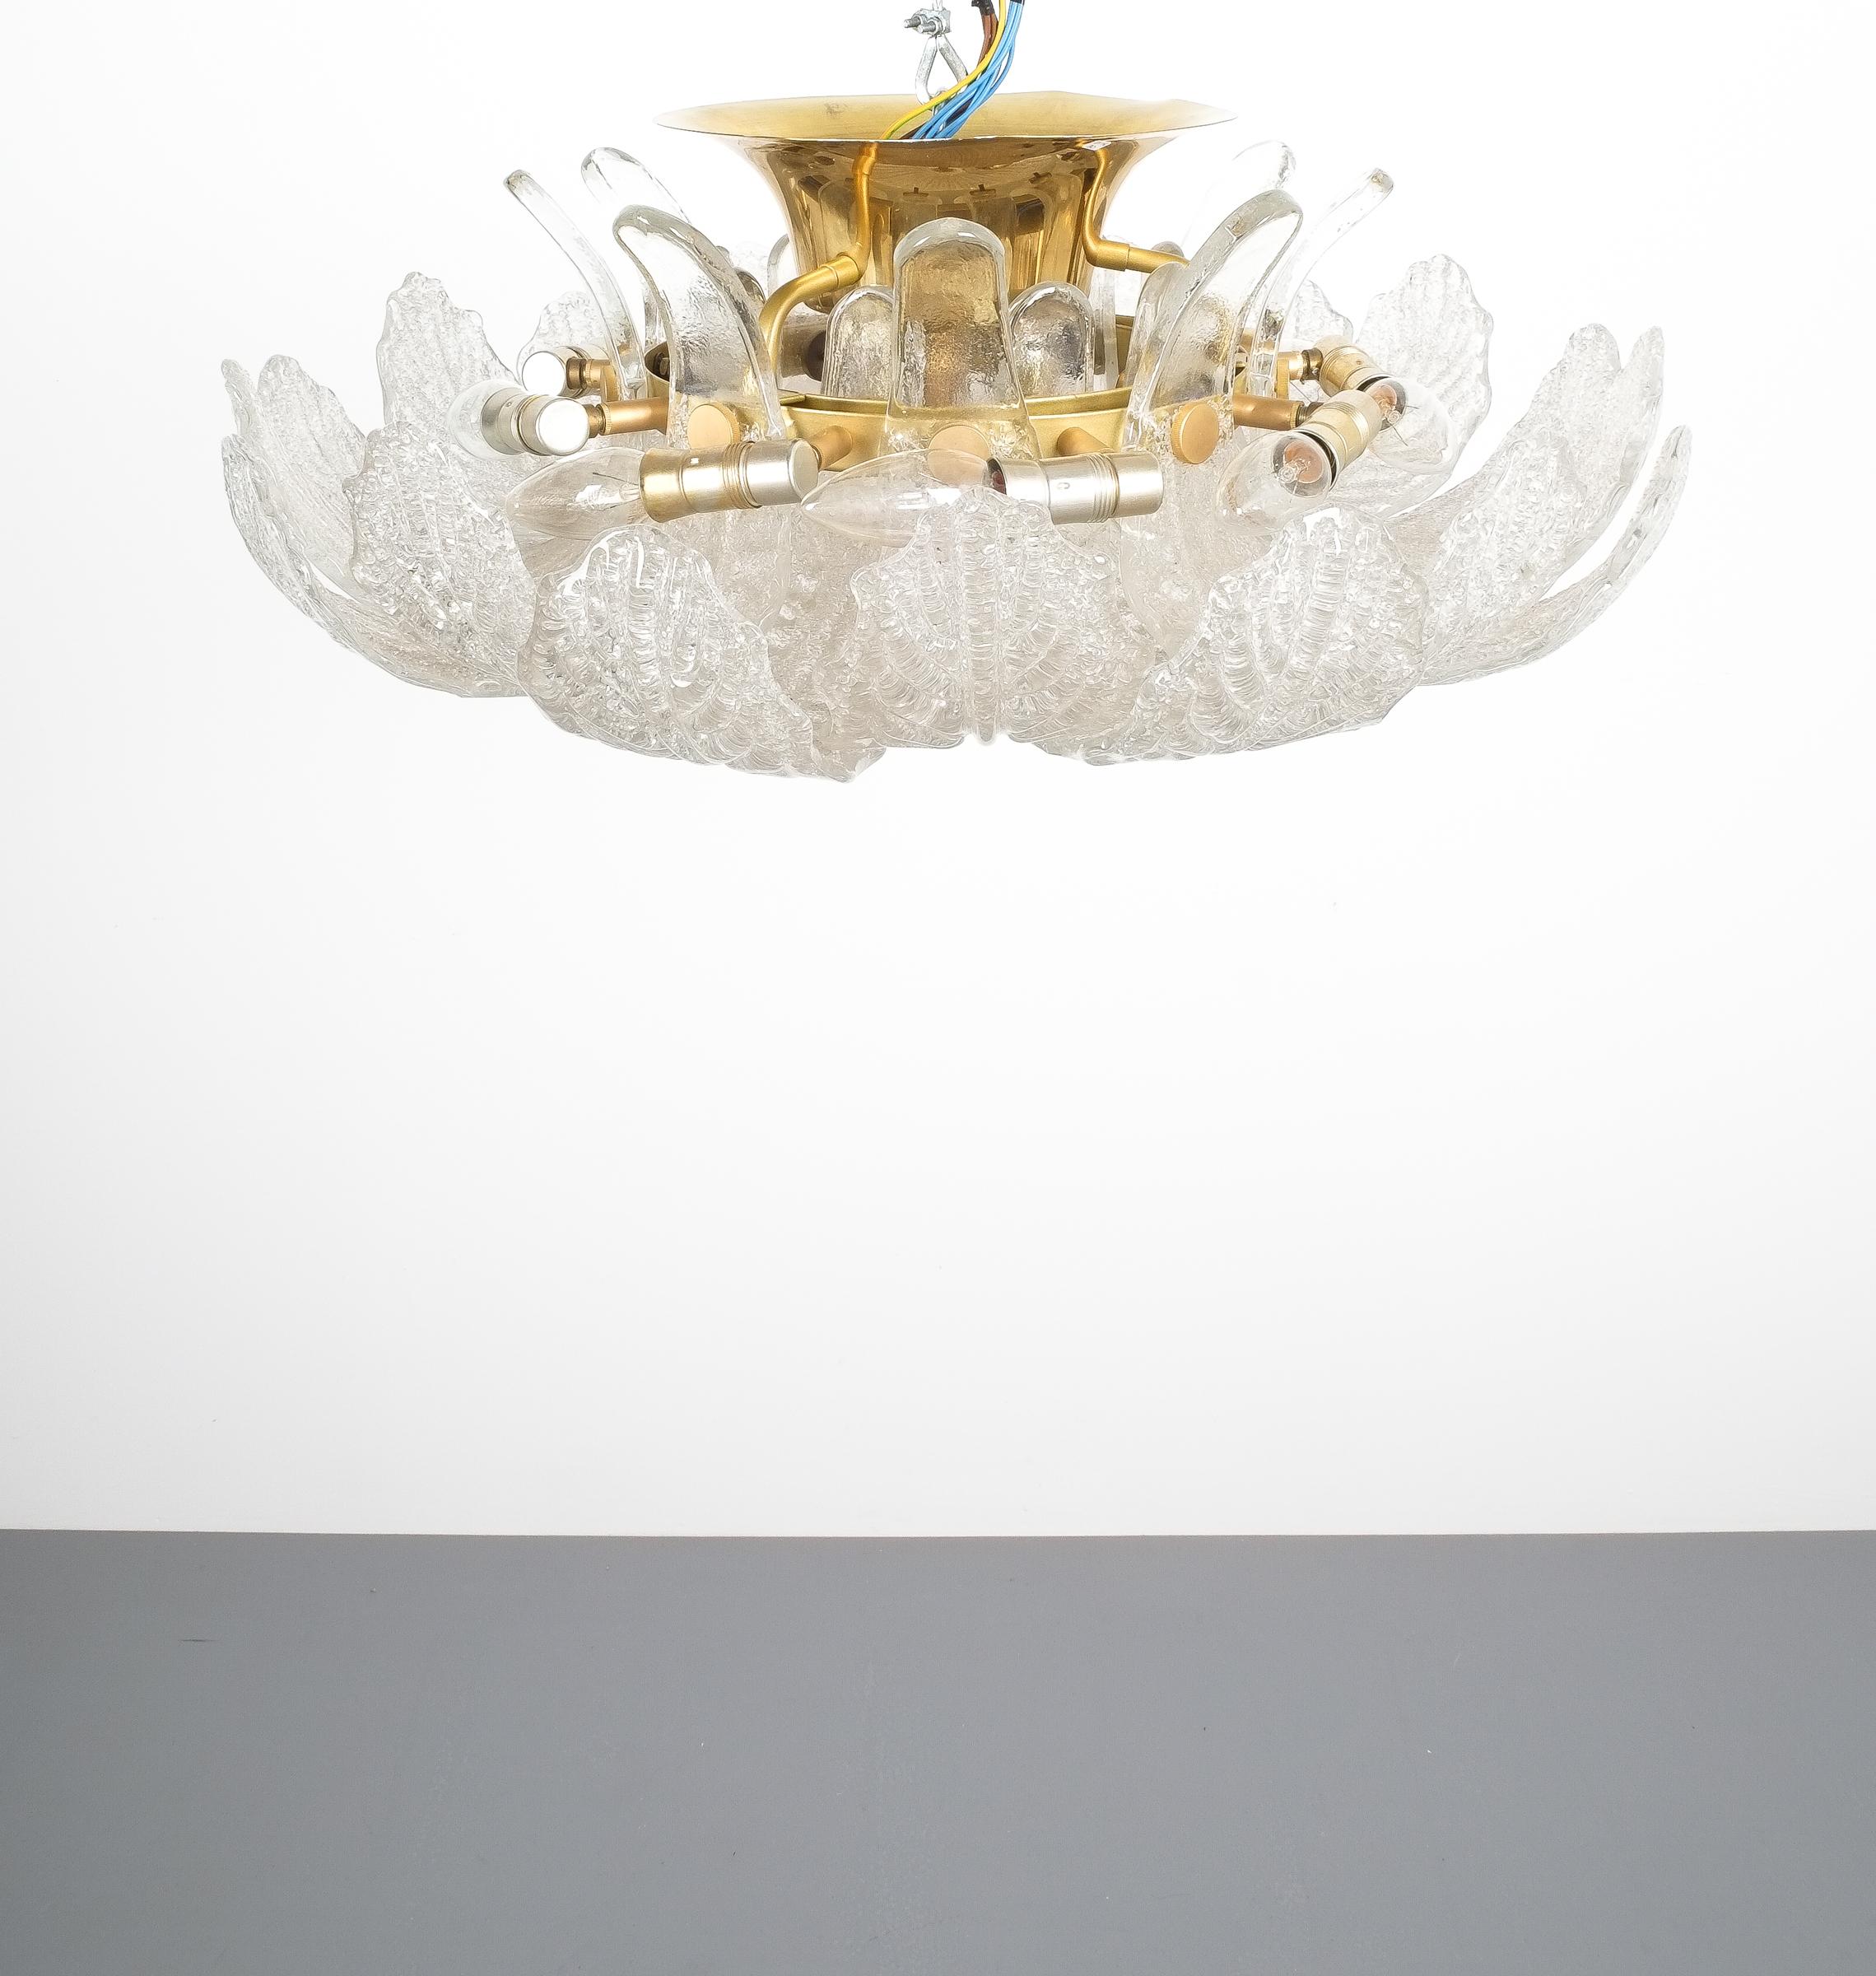 Mid-20th Century Barovier Toso Flush Mount or Chandelier Glass Brass, Italy Midcentury